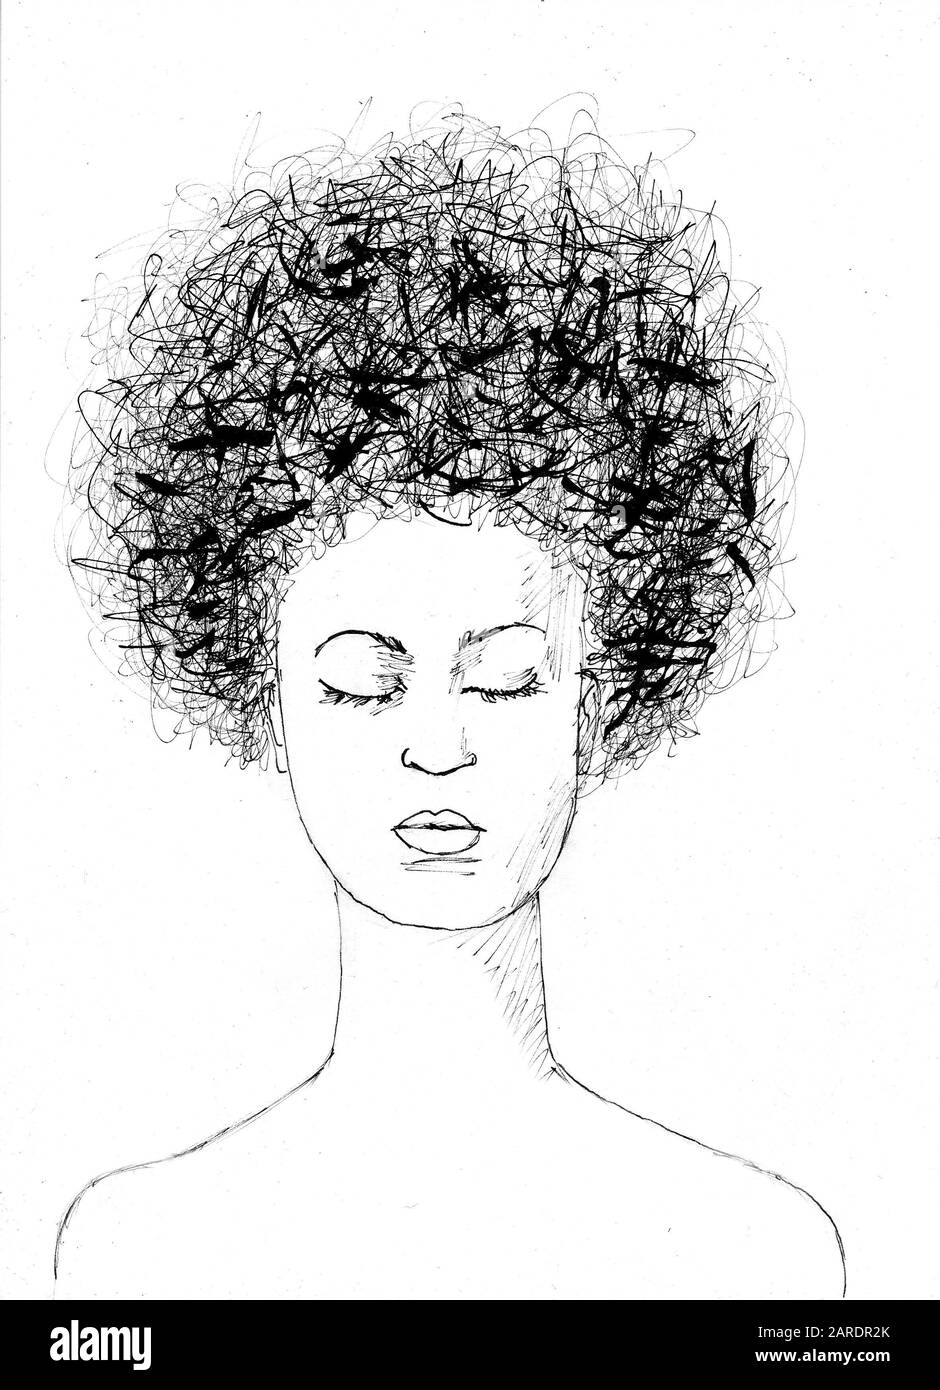 Black girl with afro hair drawing Stock Photo - Alamy